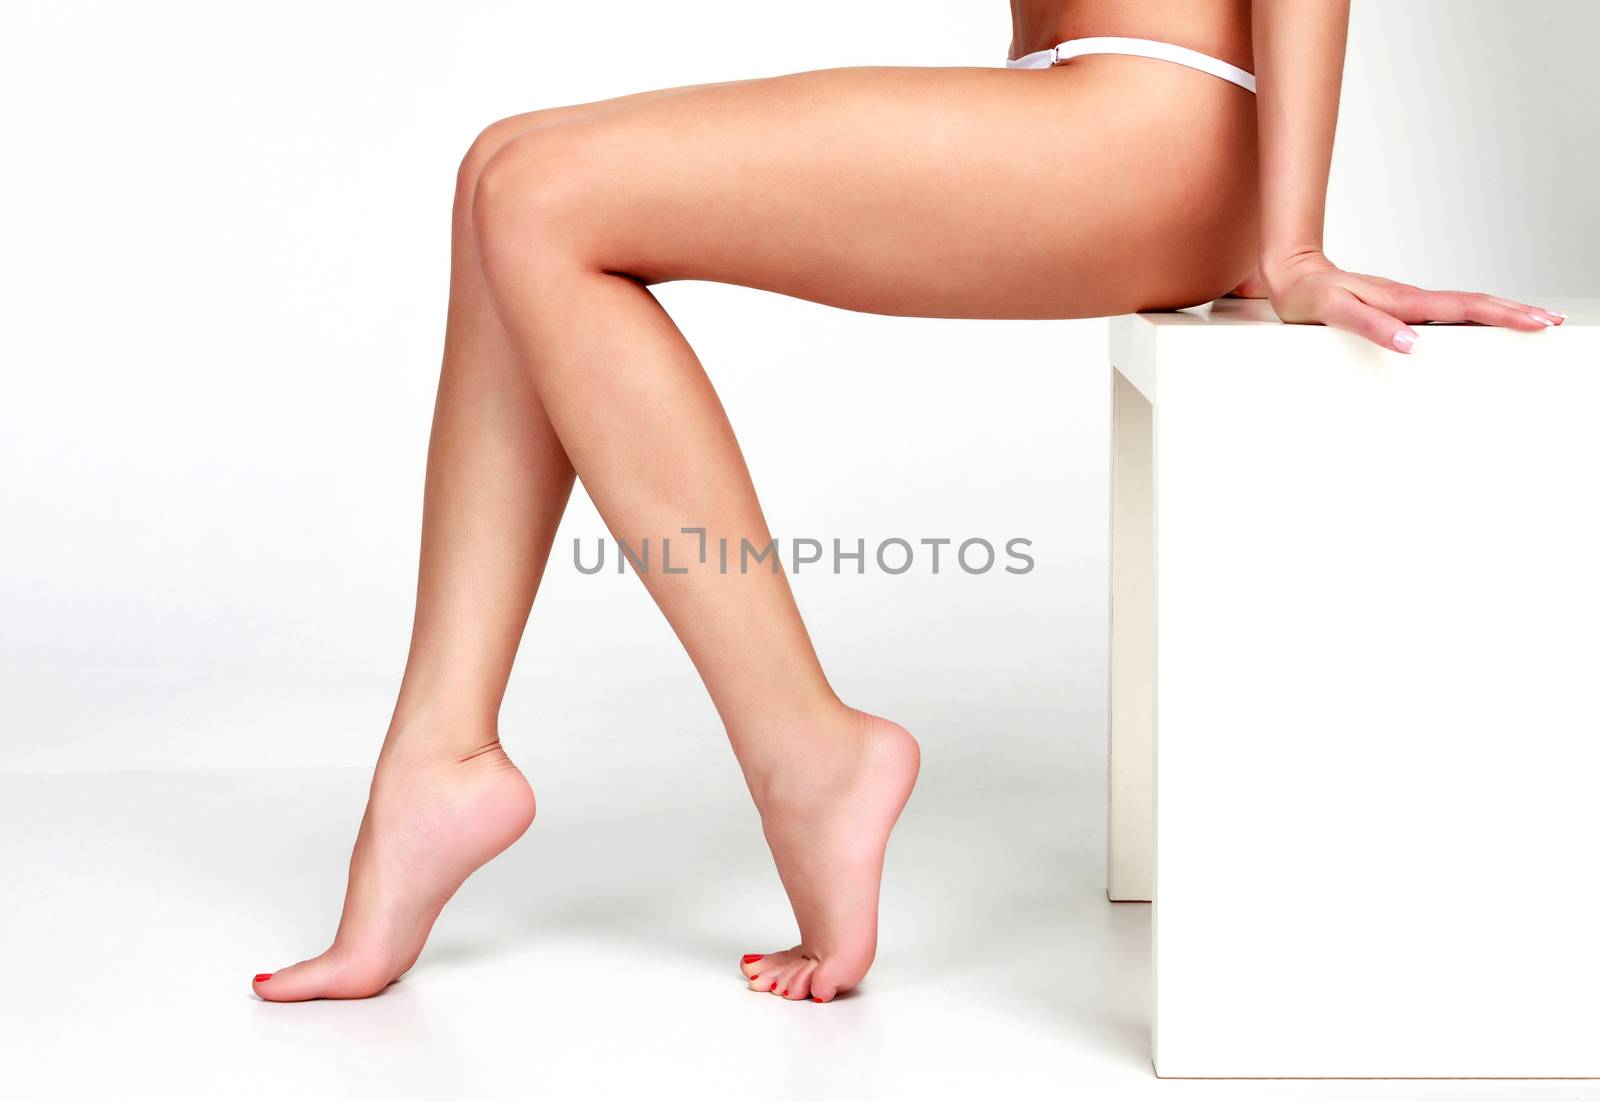 Woman legs on white background